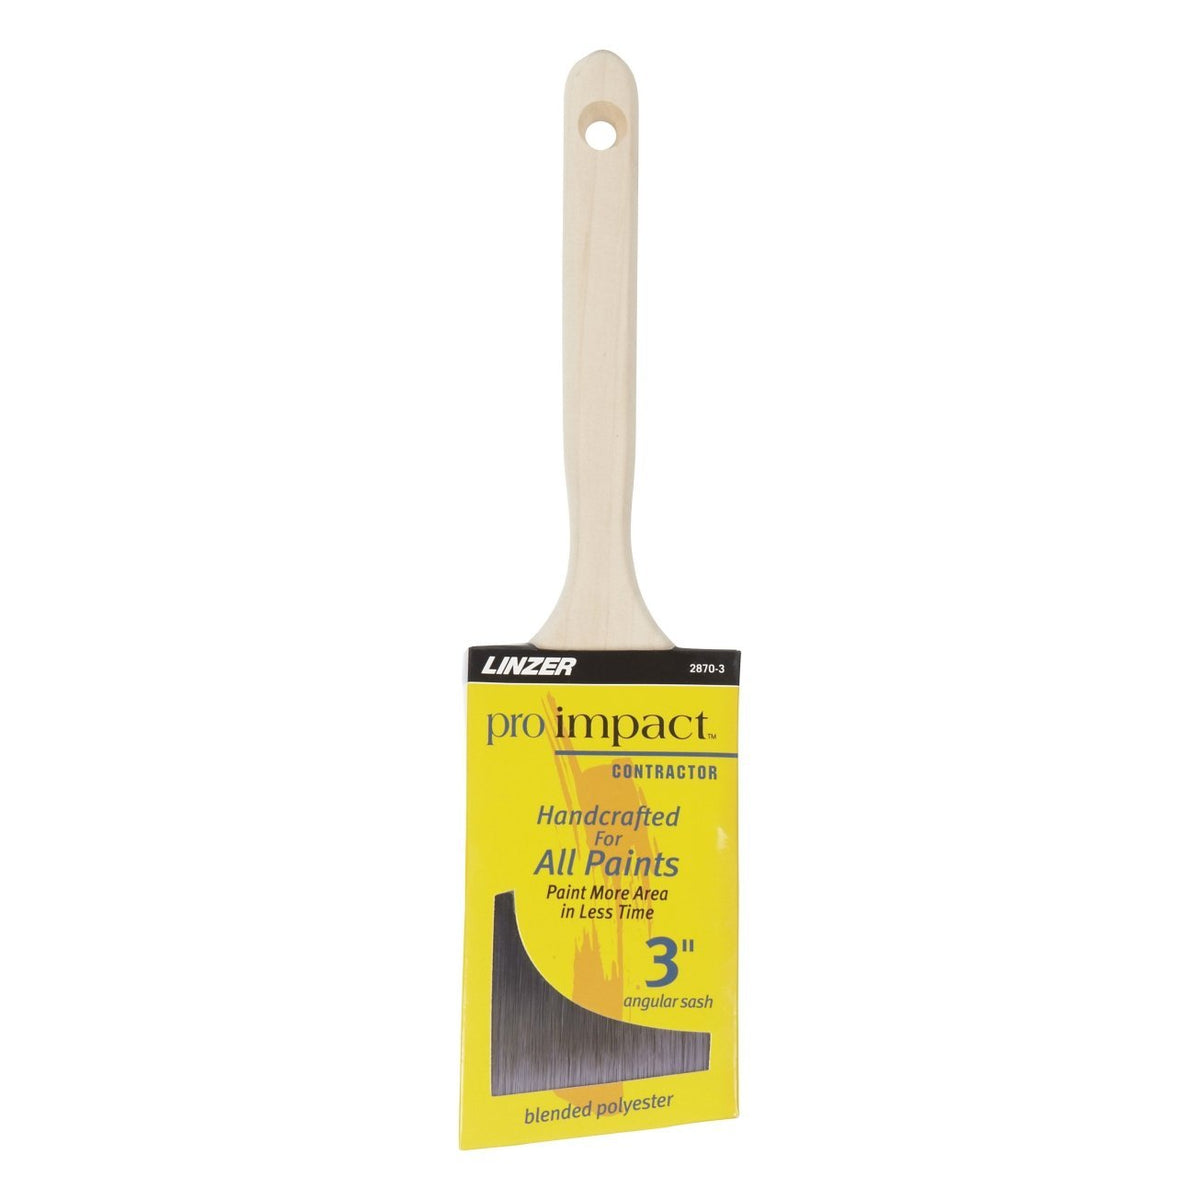 Linzer 2870 PIC 0300 Pro Impact Contractor Angled Sash Paint Brush, 3"